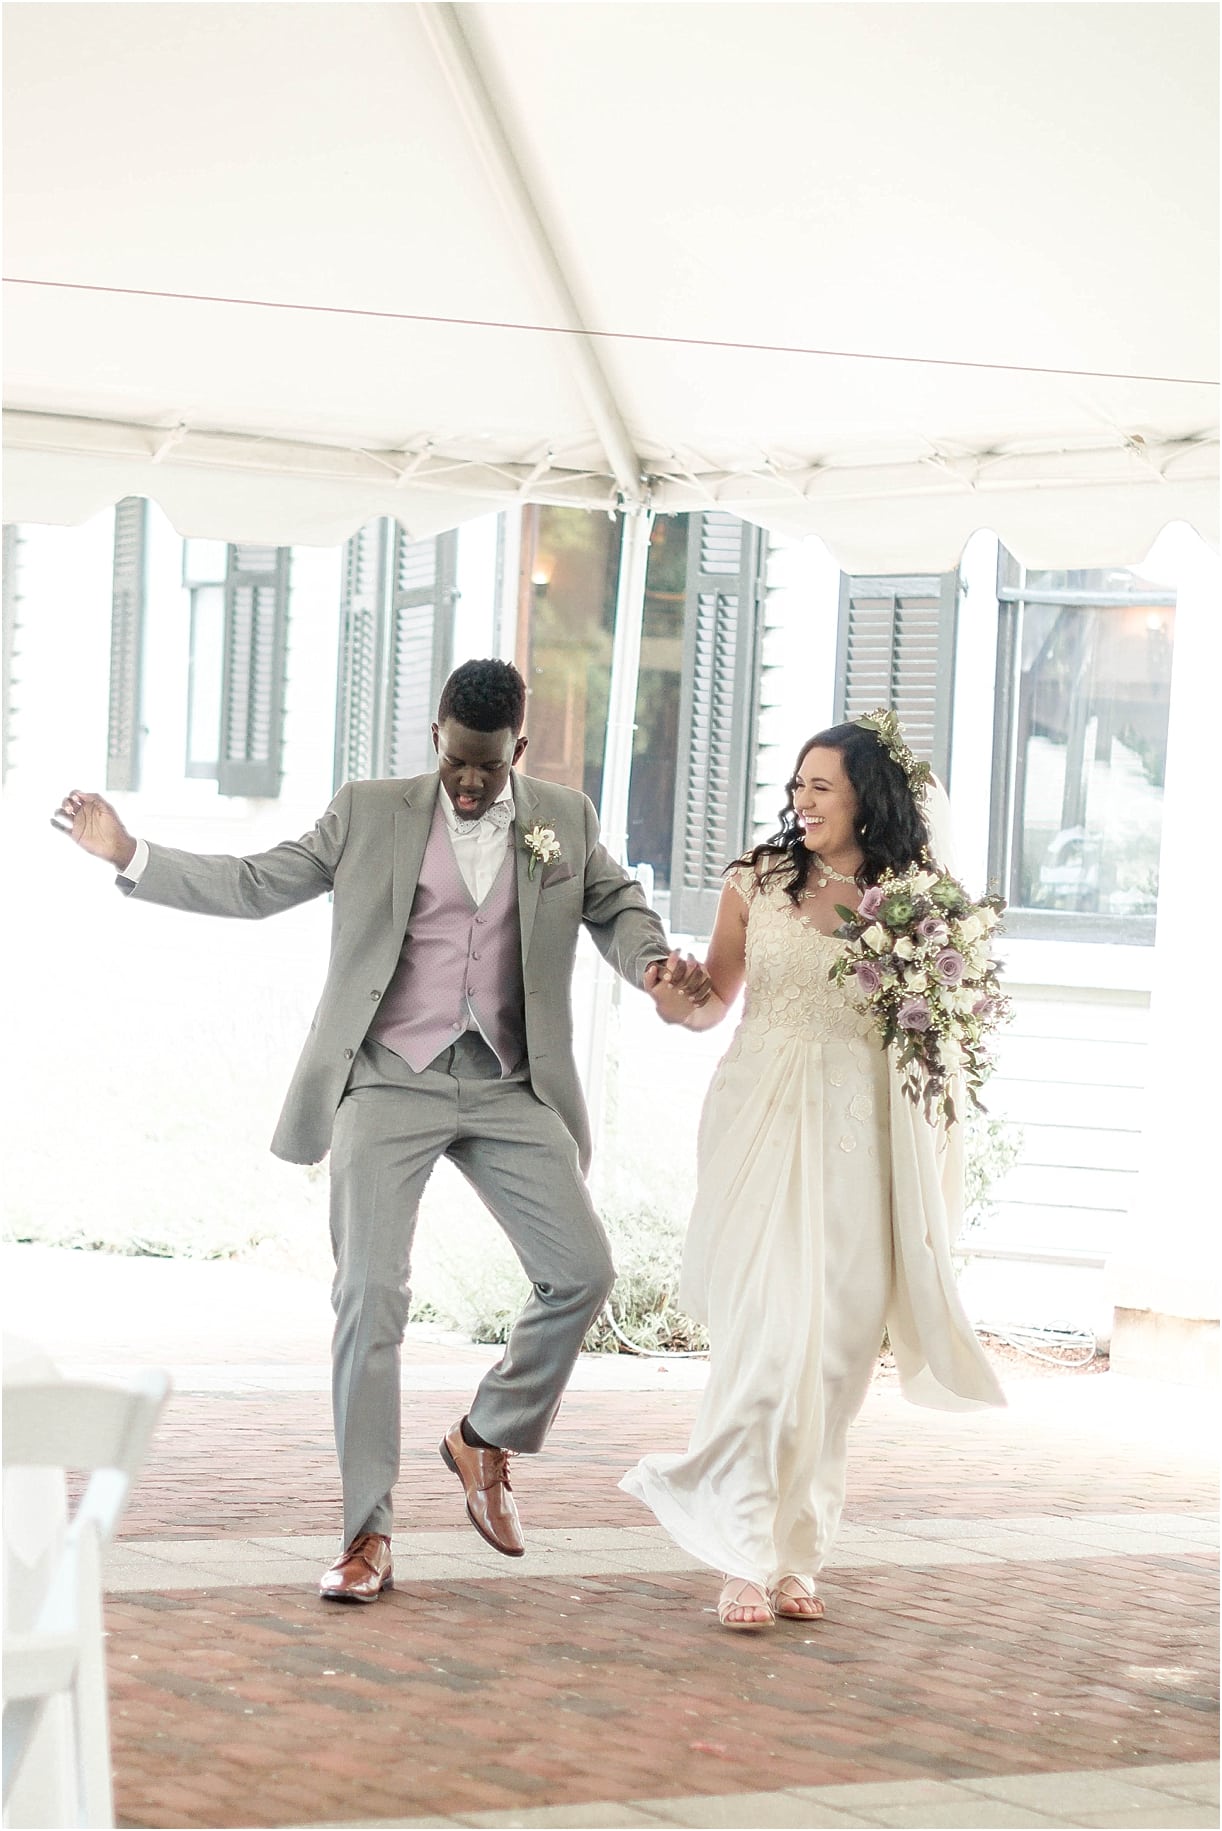 Interracial Lavender Richmond Virginia Wedding as seen on Hill City Bride Blog by Demi Mabry Photography exit groom